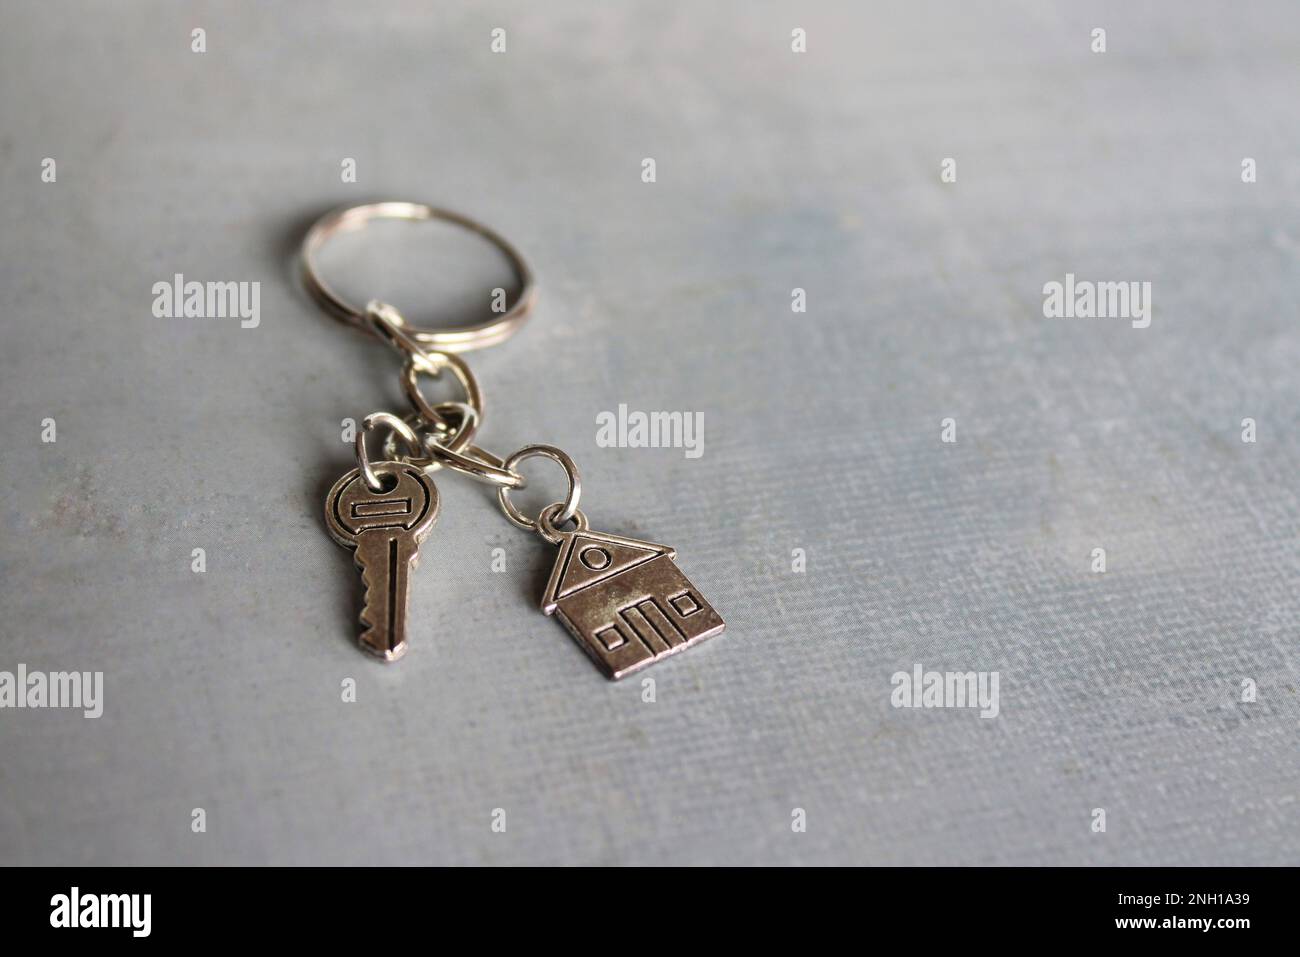 Closeup image of house shaped keychain and key with copy space. Home ownership concept. Stock Photo